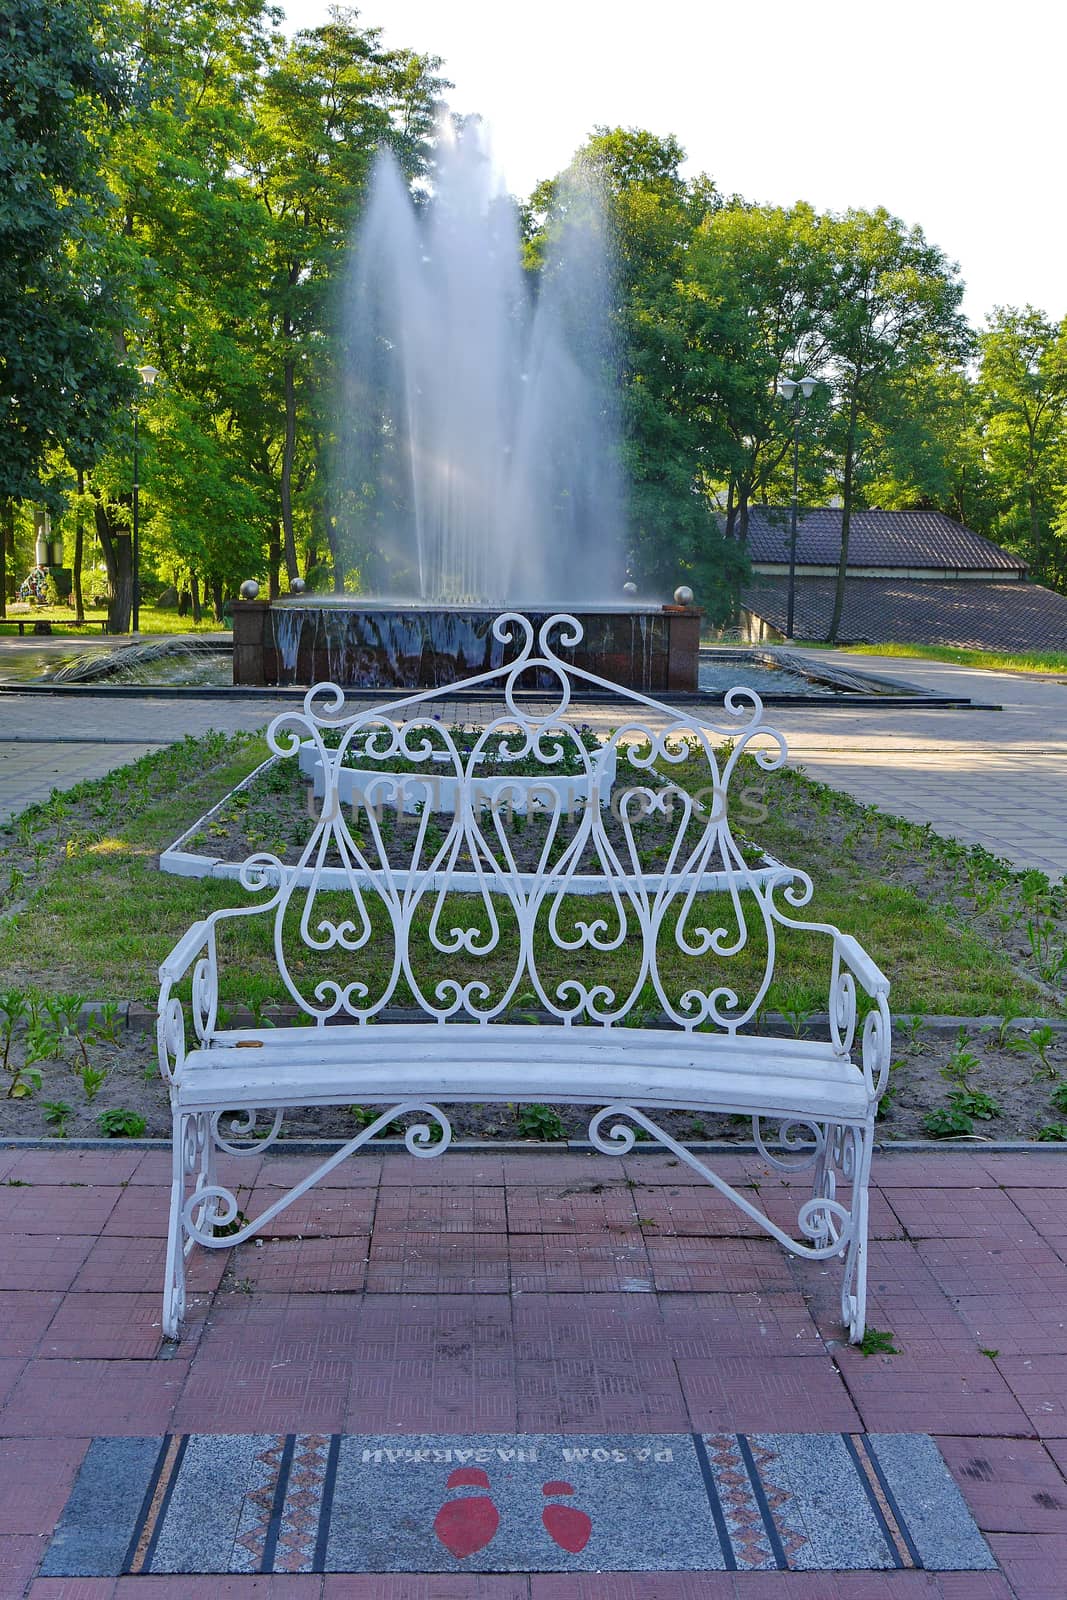 Elegant white bench with a curved back standing in a park near a green lawn in front of a beautiful fountain with clear water jets.